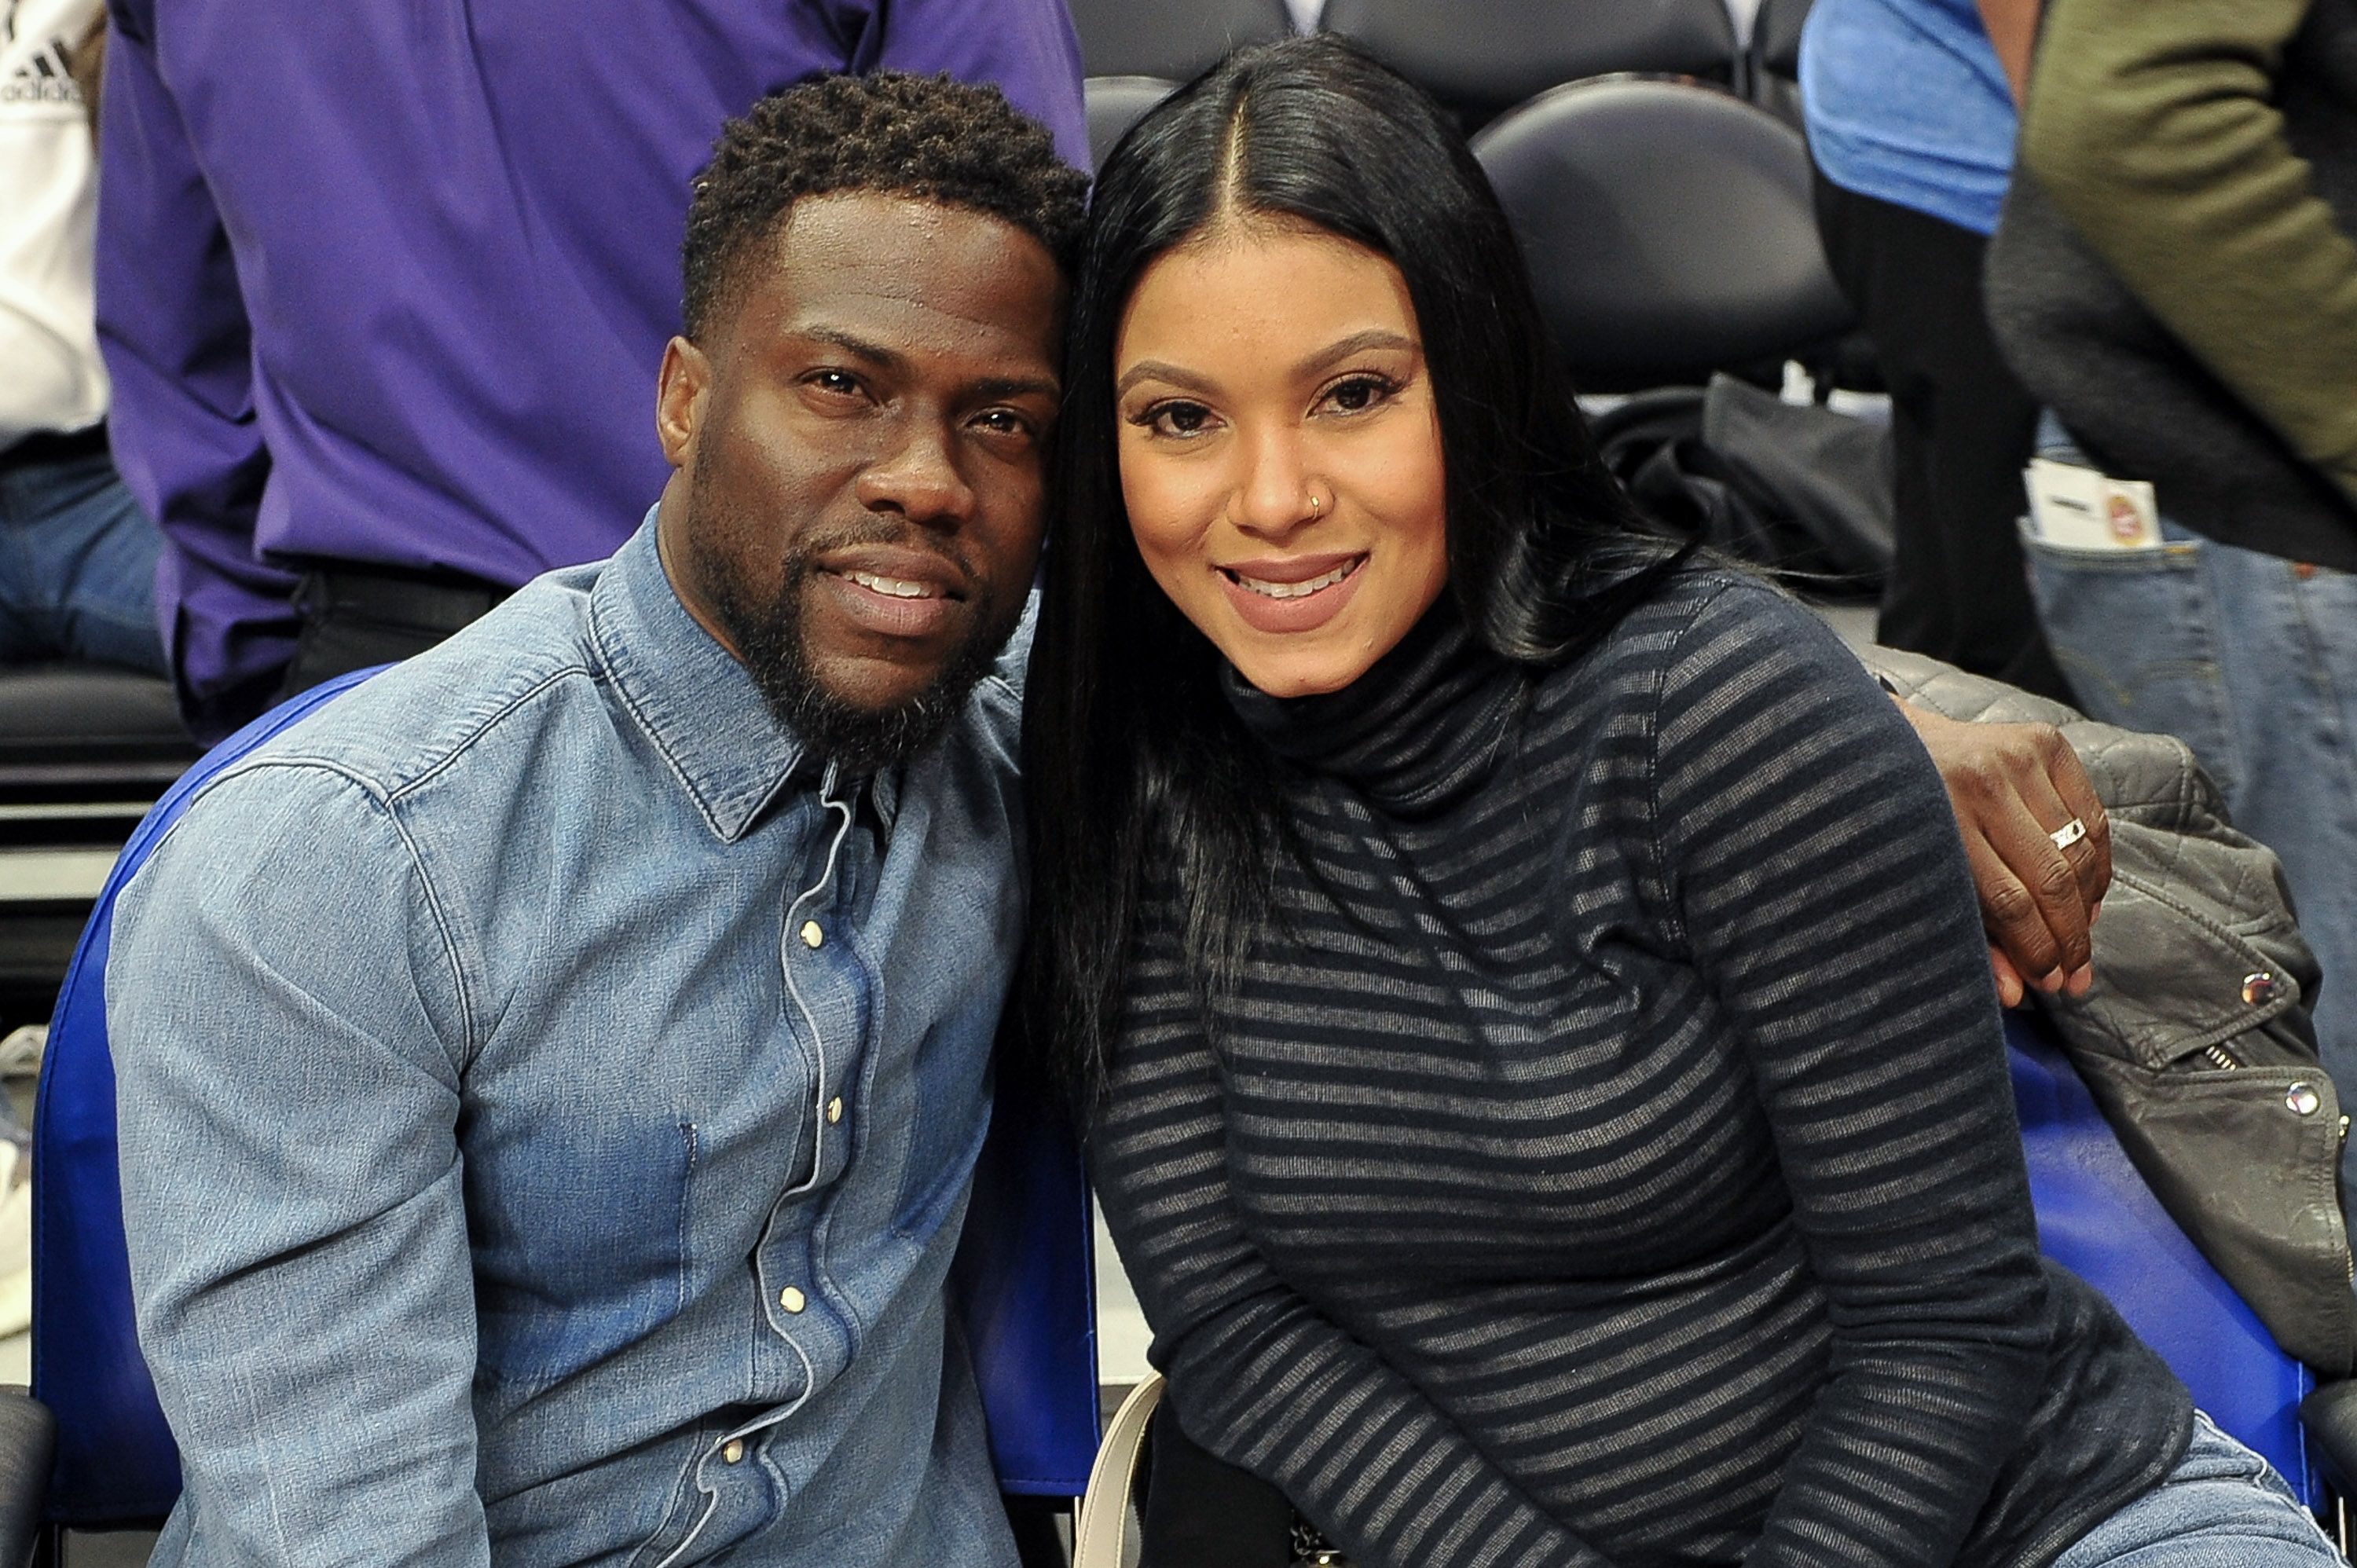 Actor Kevin Hart and Eniko Parrish at a basketball game between the Los Angeles Clippers and the Minnesota Timberwolves at Staples Center in Los Angeles on January 22, 2018. | Photo: Getty Images